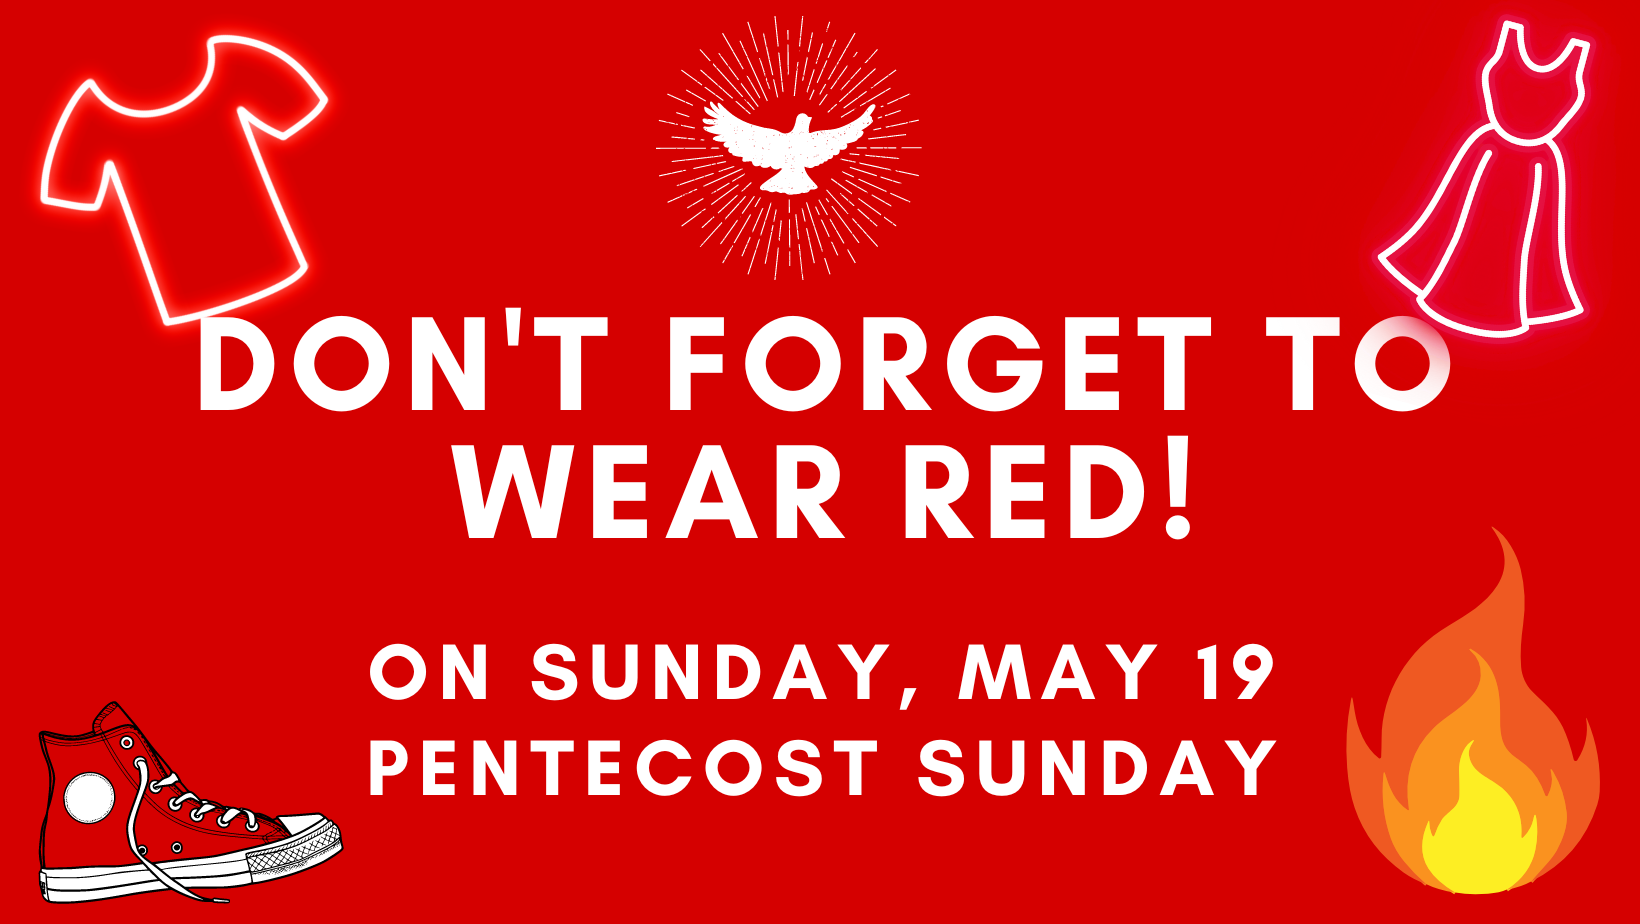 DON’T FORGE TO WEAR RED!